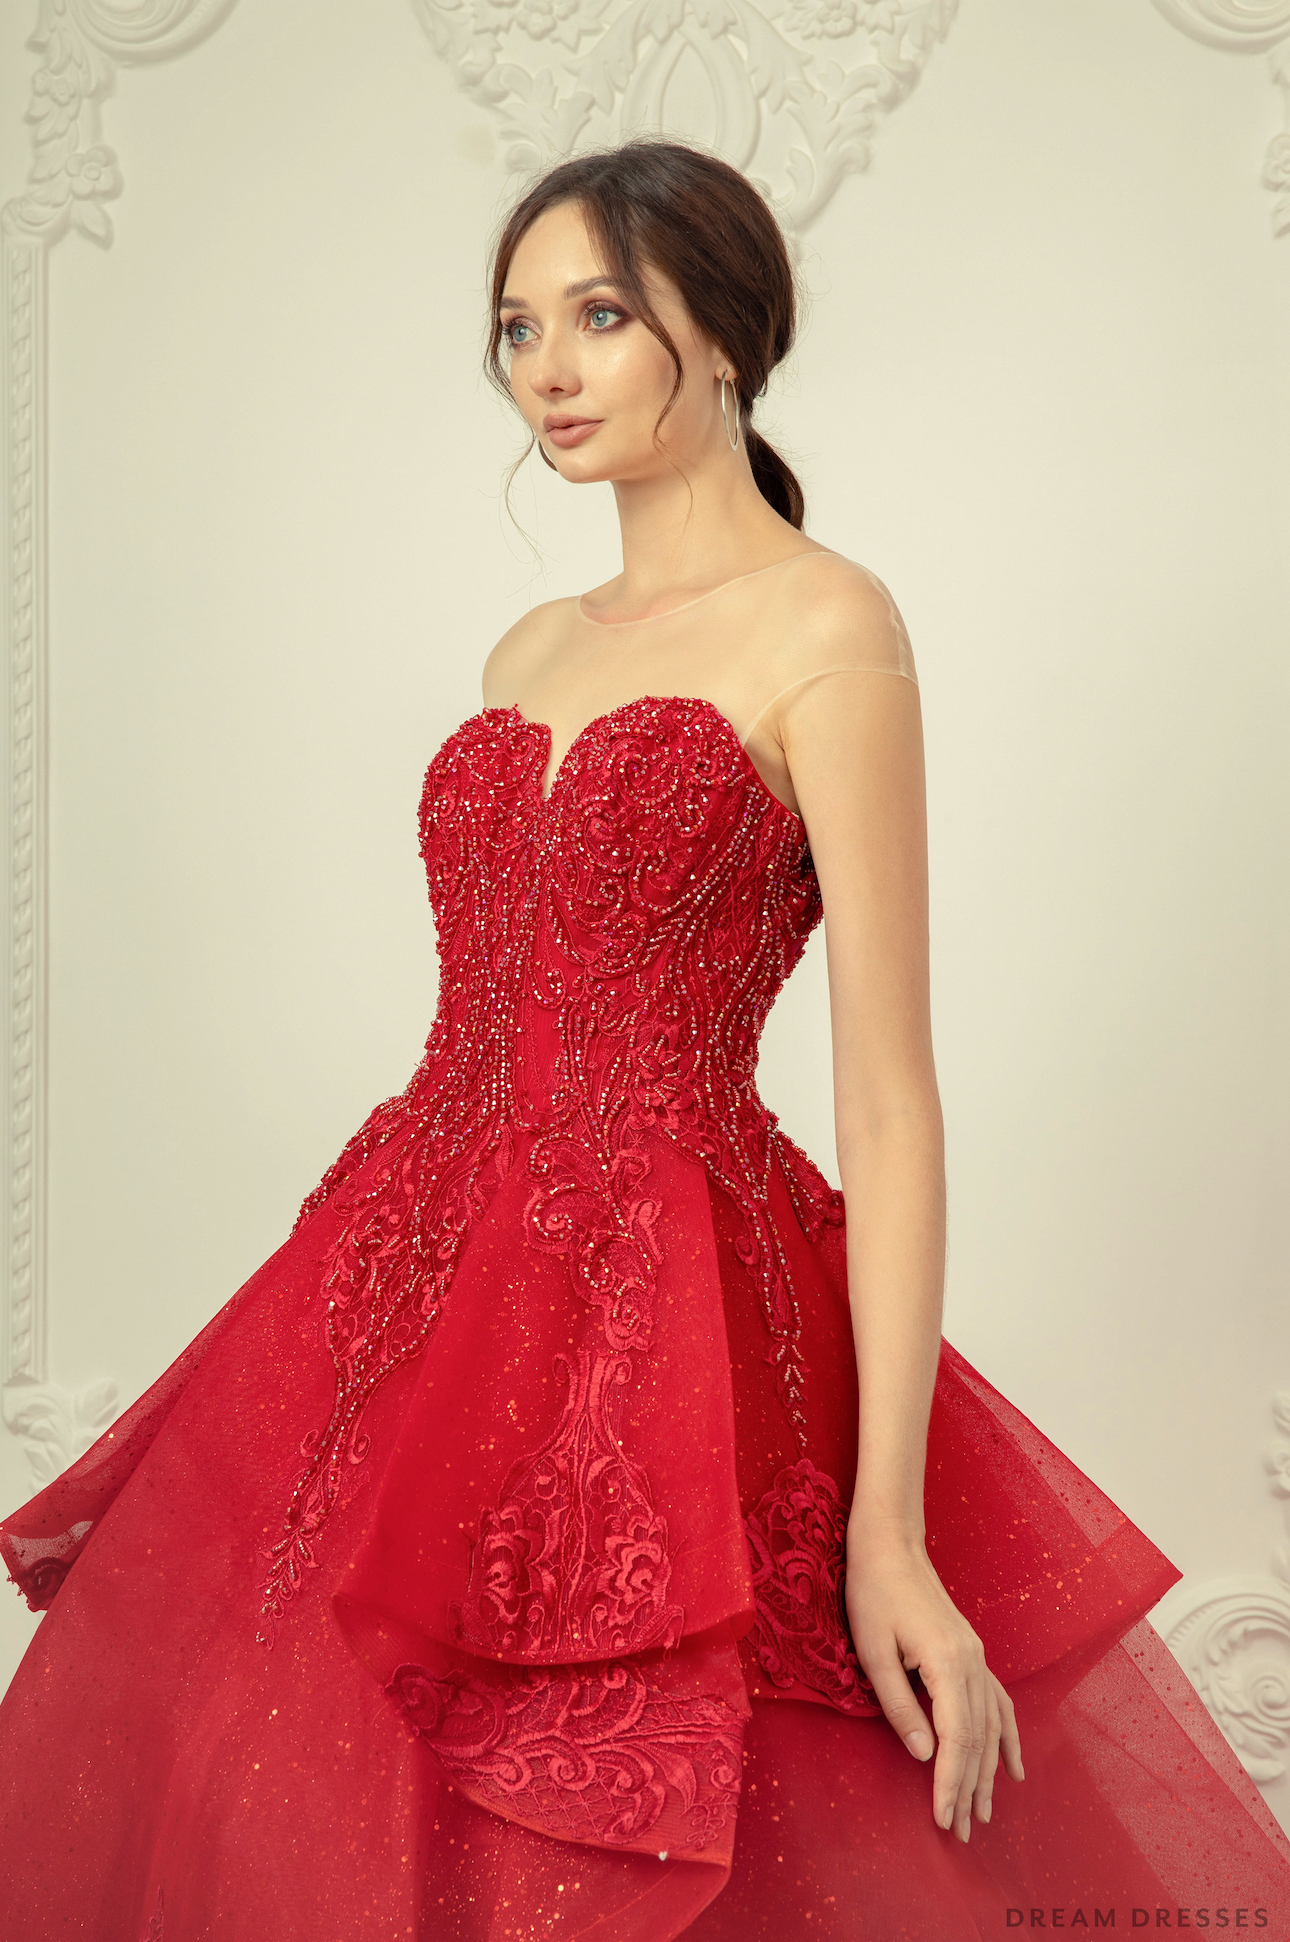 Red Ball Gown Wedding Dress (#Imilia)